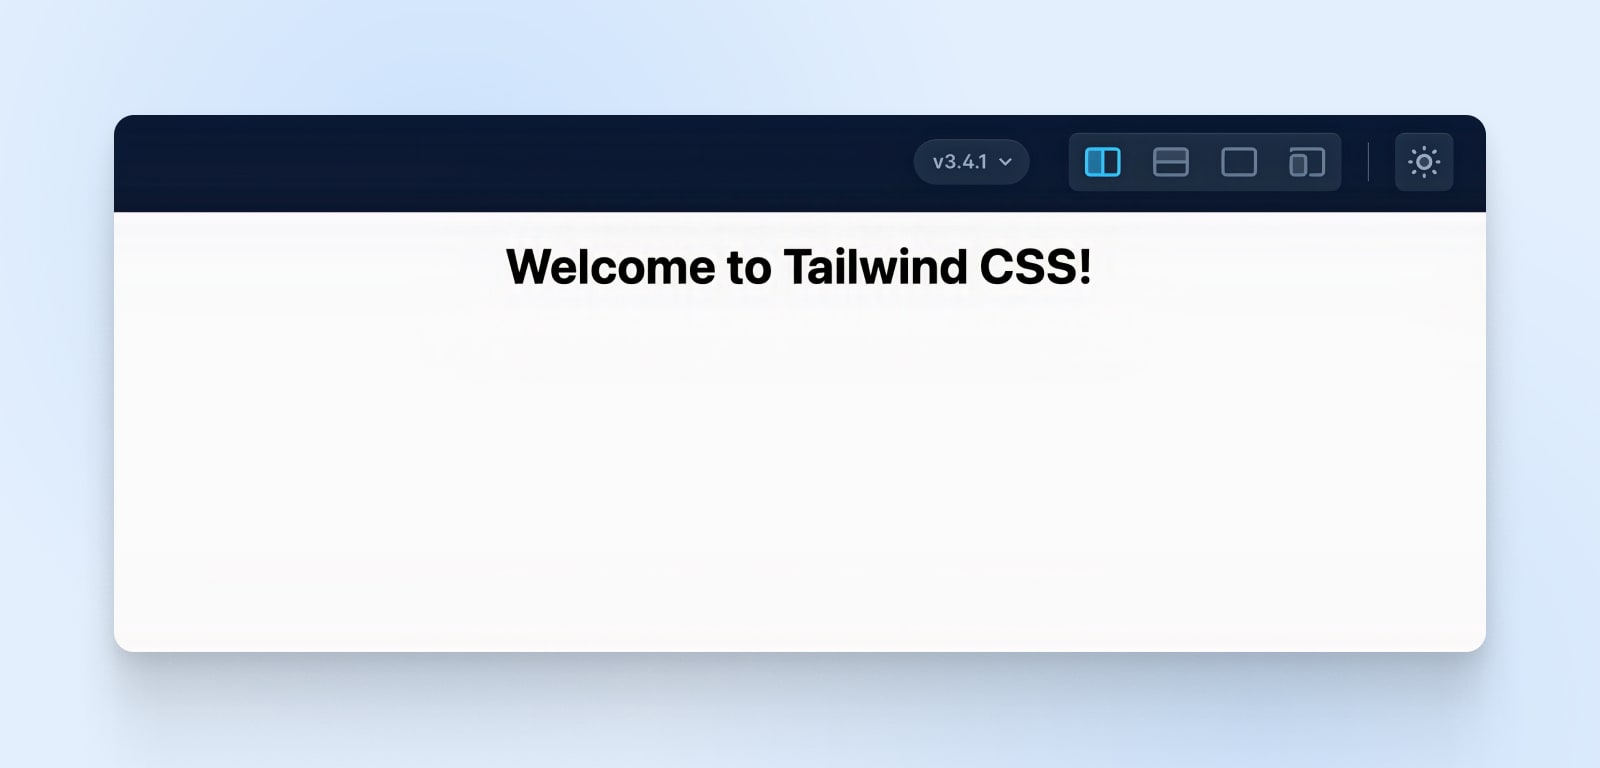 "Welcome to Tailwind CSS!" bold heading. 